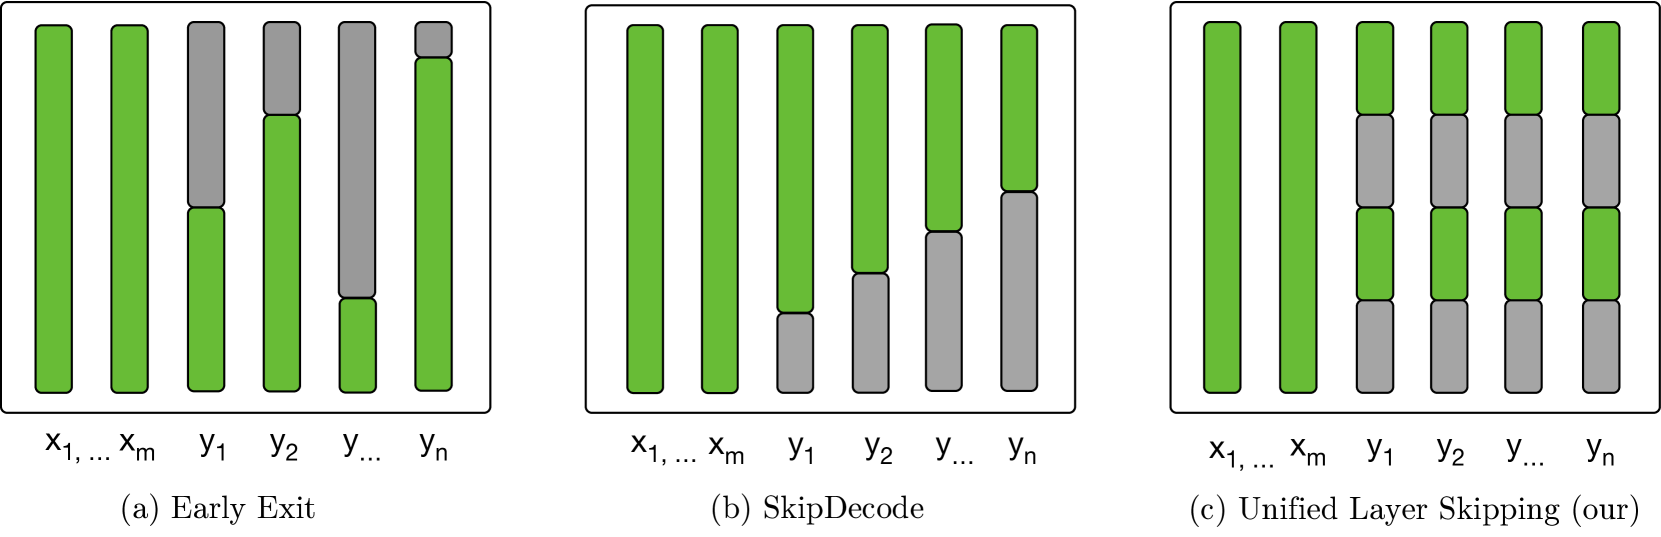 Accelerating Inference in Large Language Models with a Unified Layer Skipping Strategy